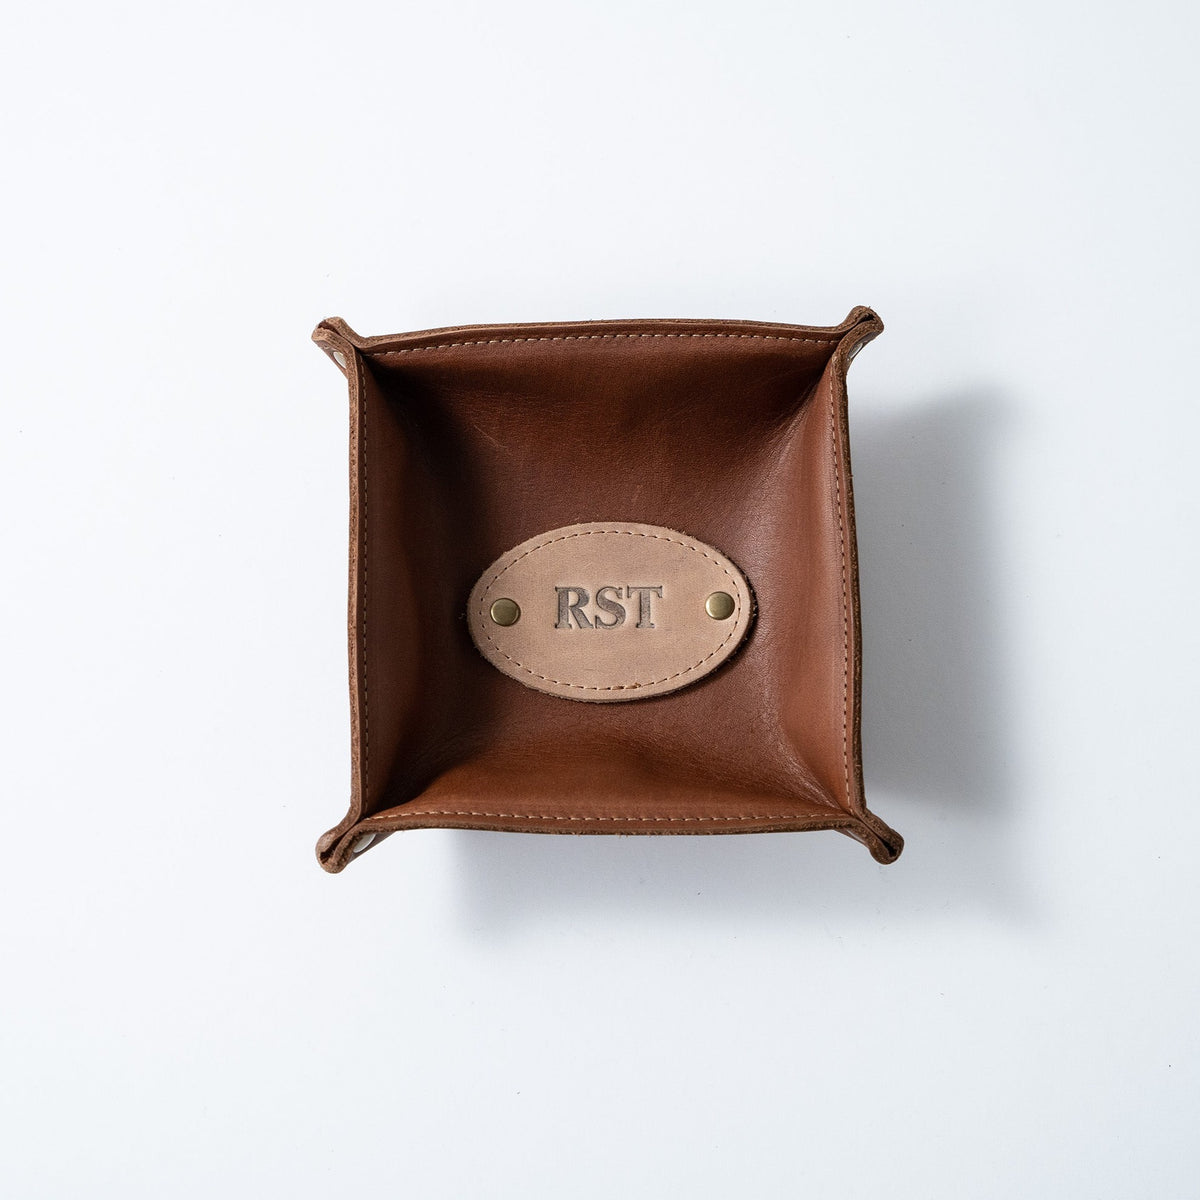 The Monticello Fine Leather Personalized Desk Valet Caddy Tray for Dresser or Office Gift